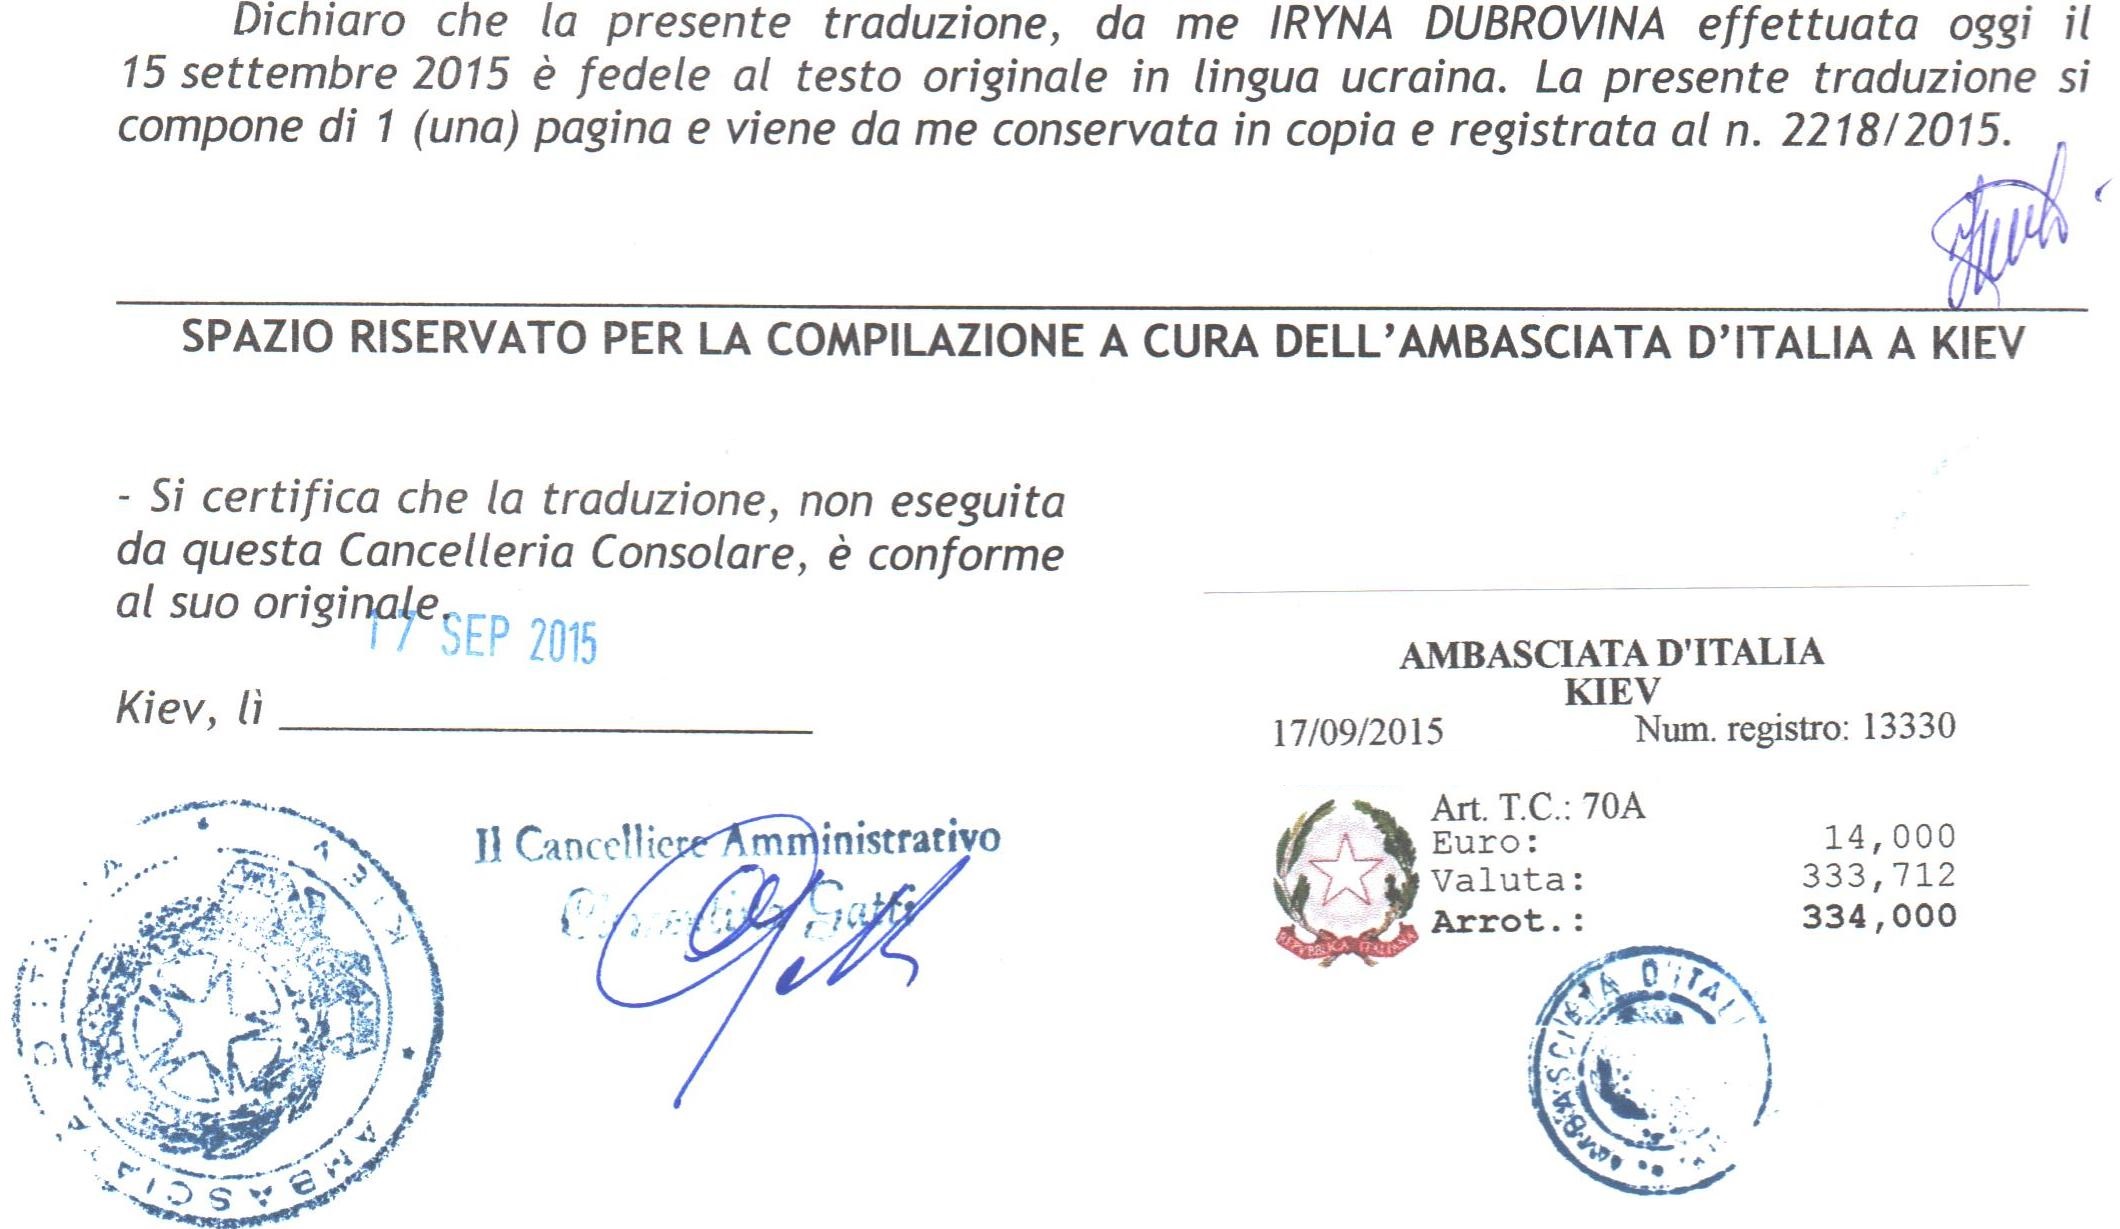 Consular attestation and legalization at Embassy of Italy in Ukraine